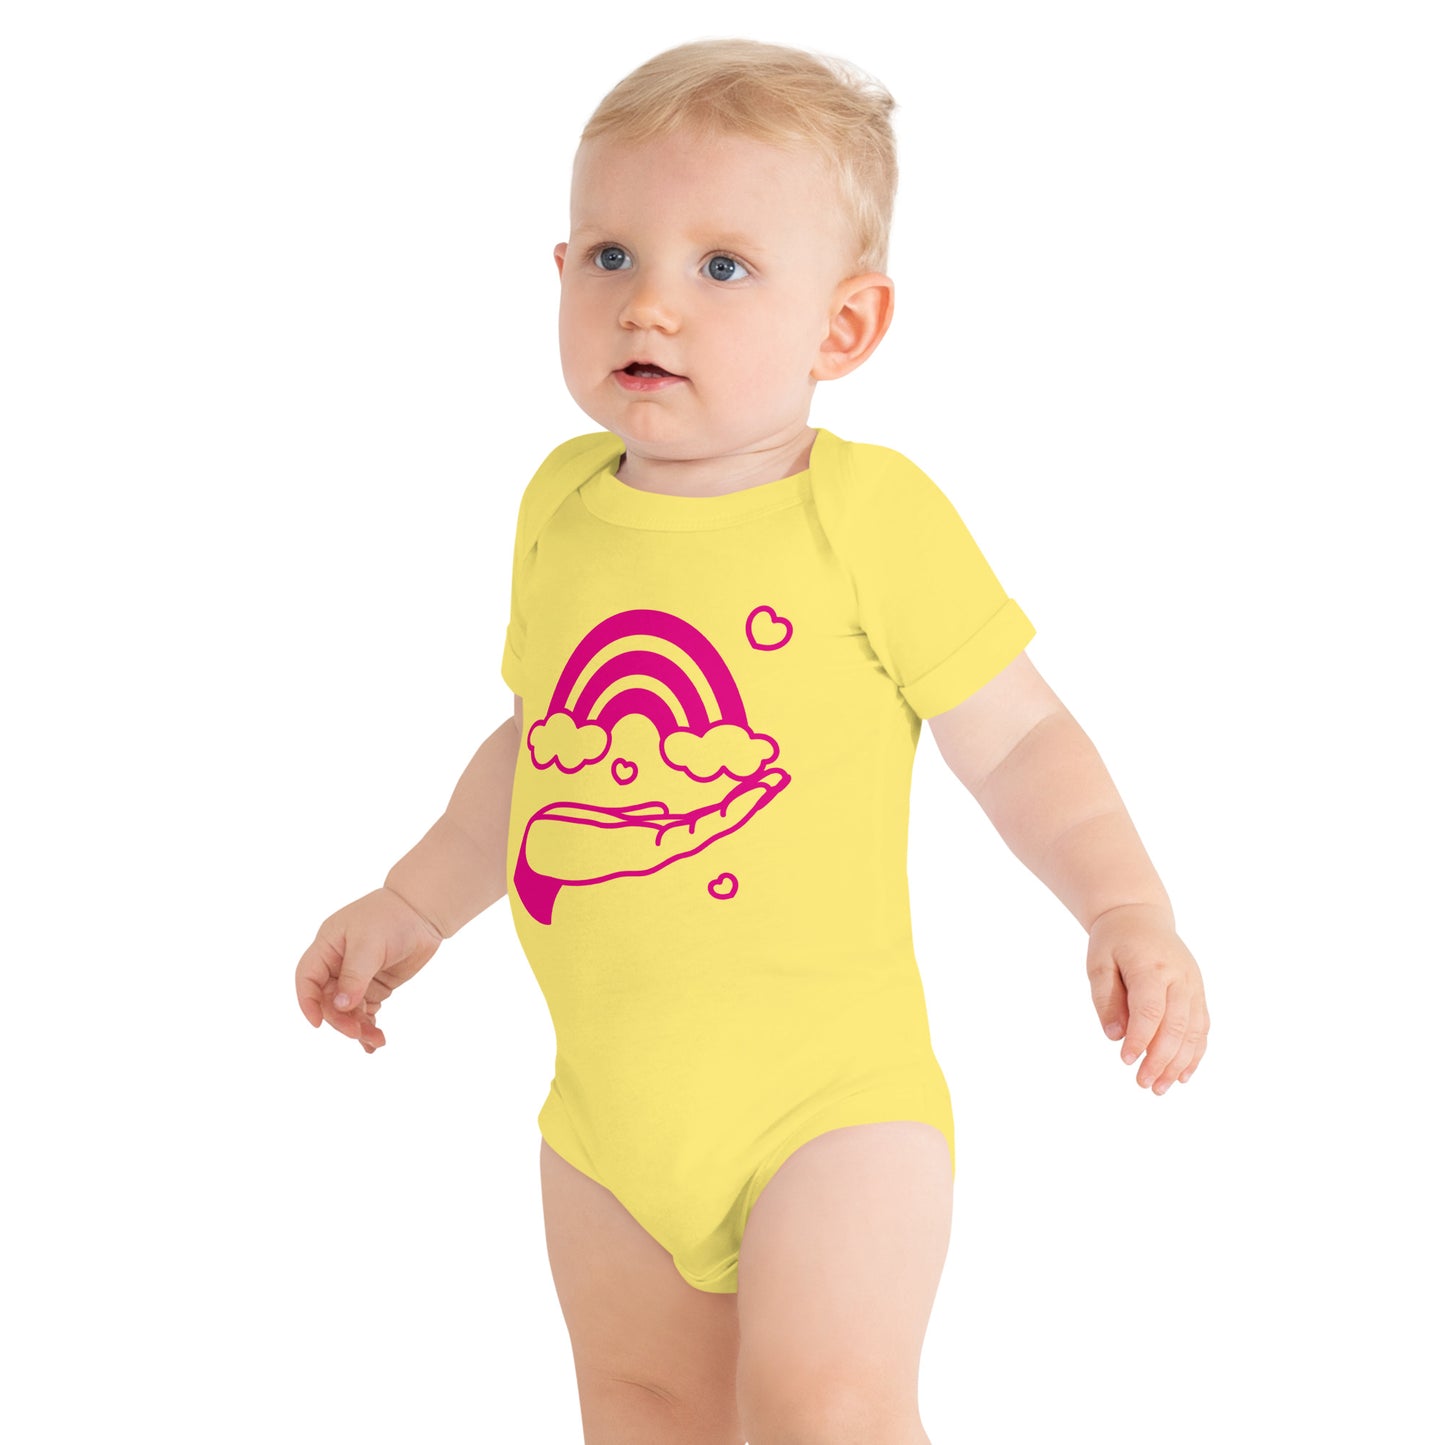 baby with yellow short sleeve one piece with print of pink hand holding a pink rainbow